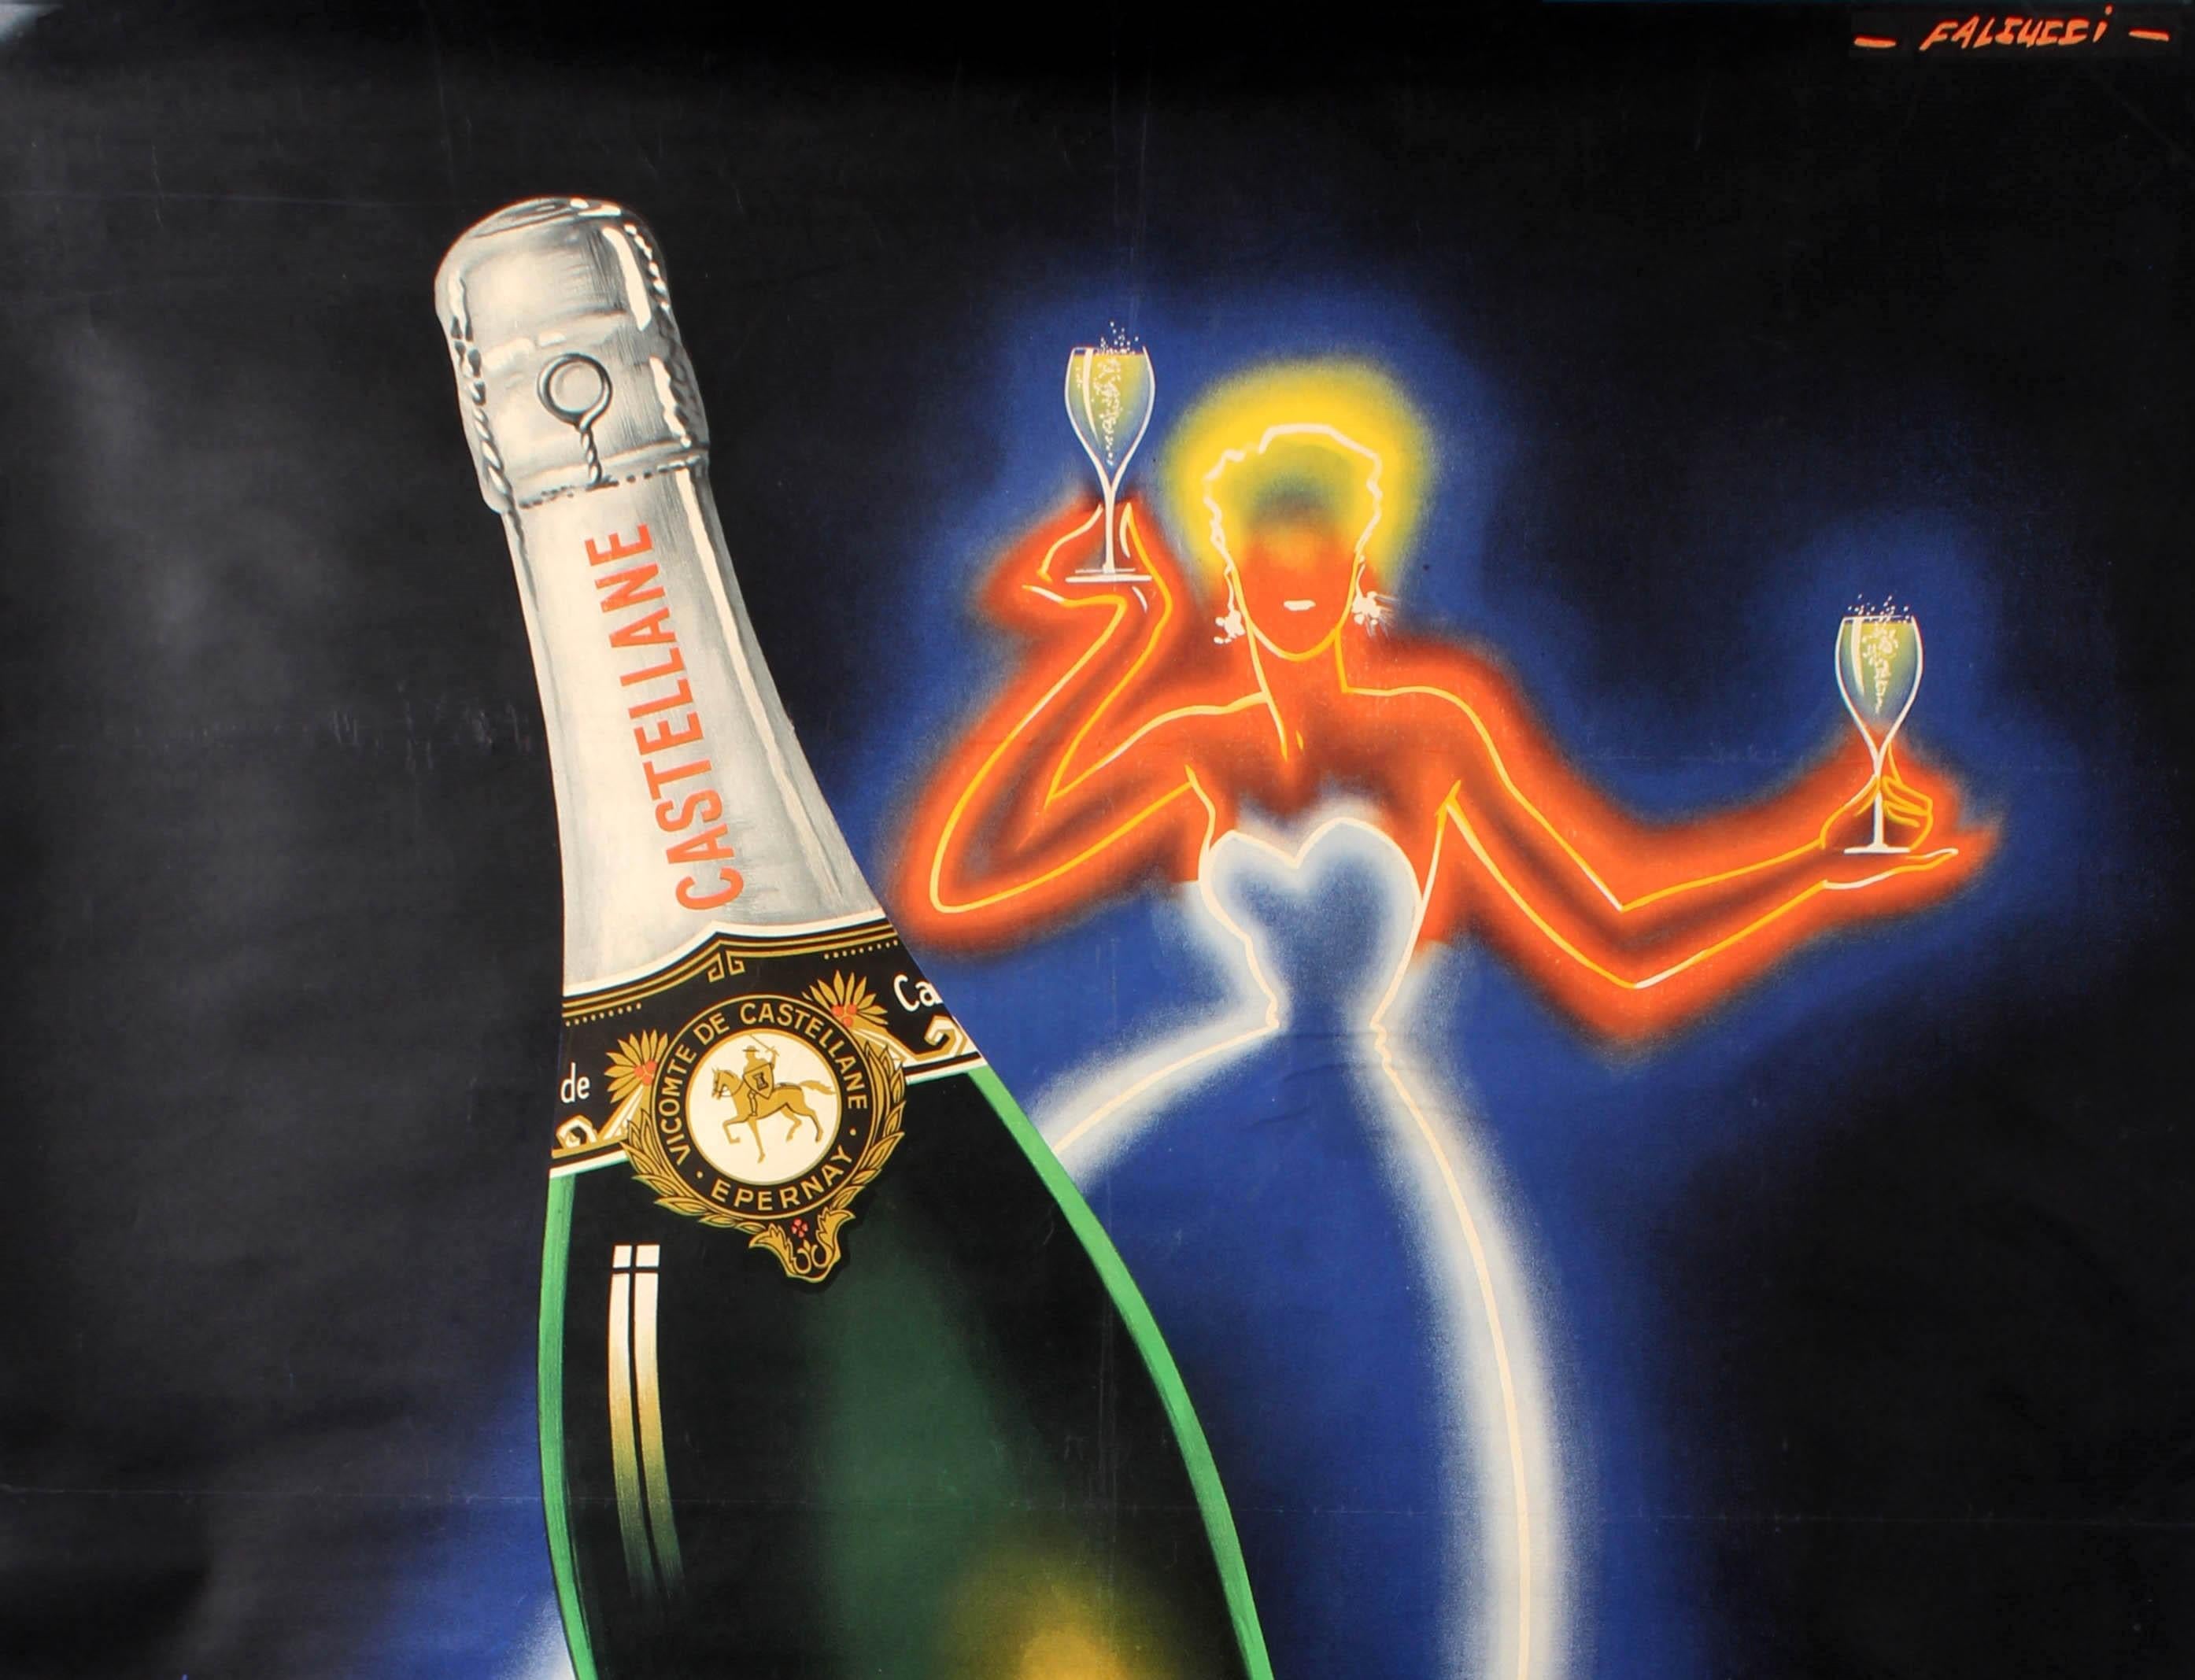 Original vintage drink advertising poster for Champagne de Castellane featuring a stylish design by Robert Falcucci (1900-1989) showing an elegant lady in neon colours holding up two glasses of Castellane champagne against the dark background with a